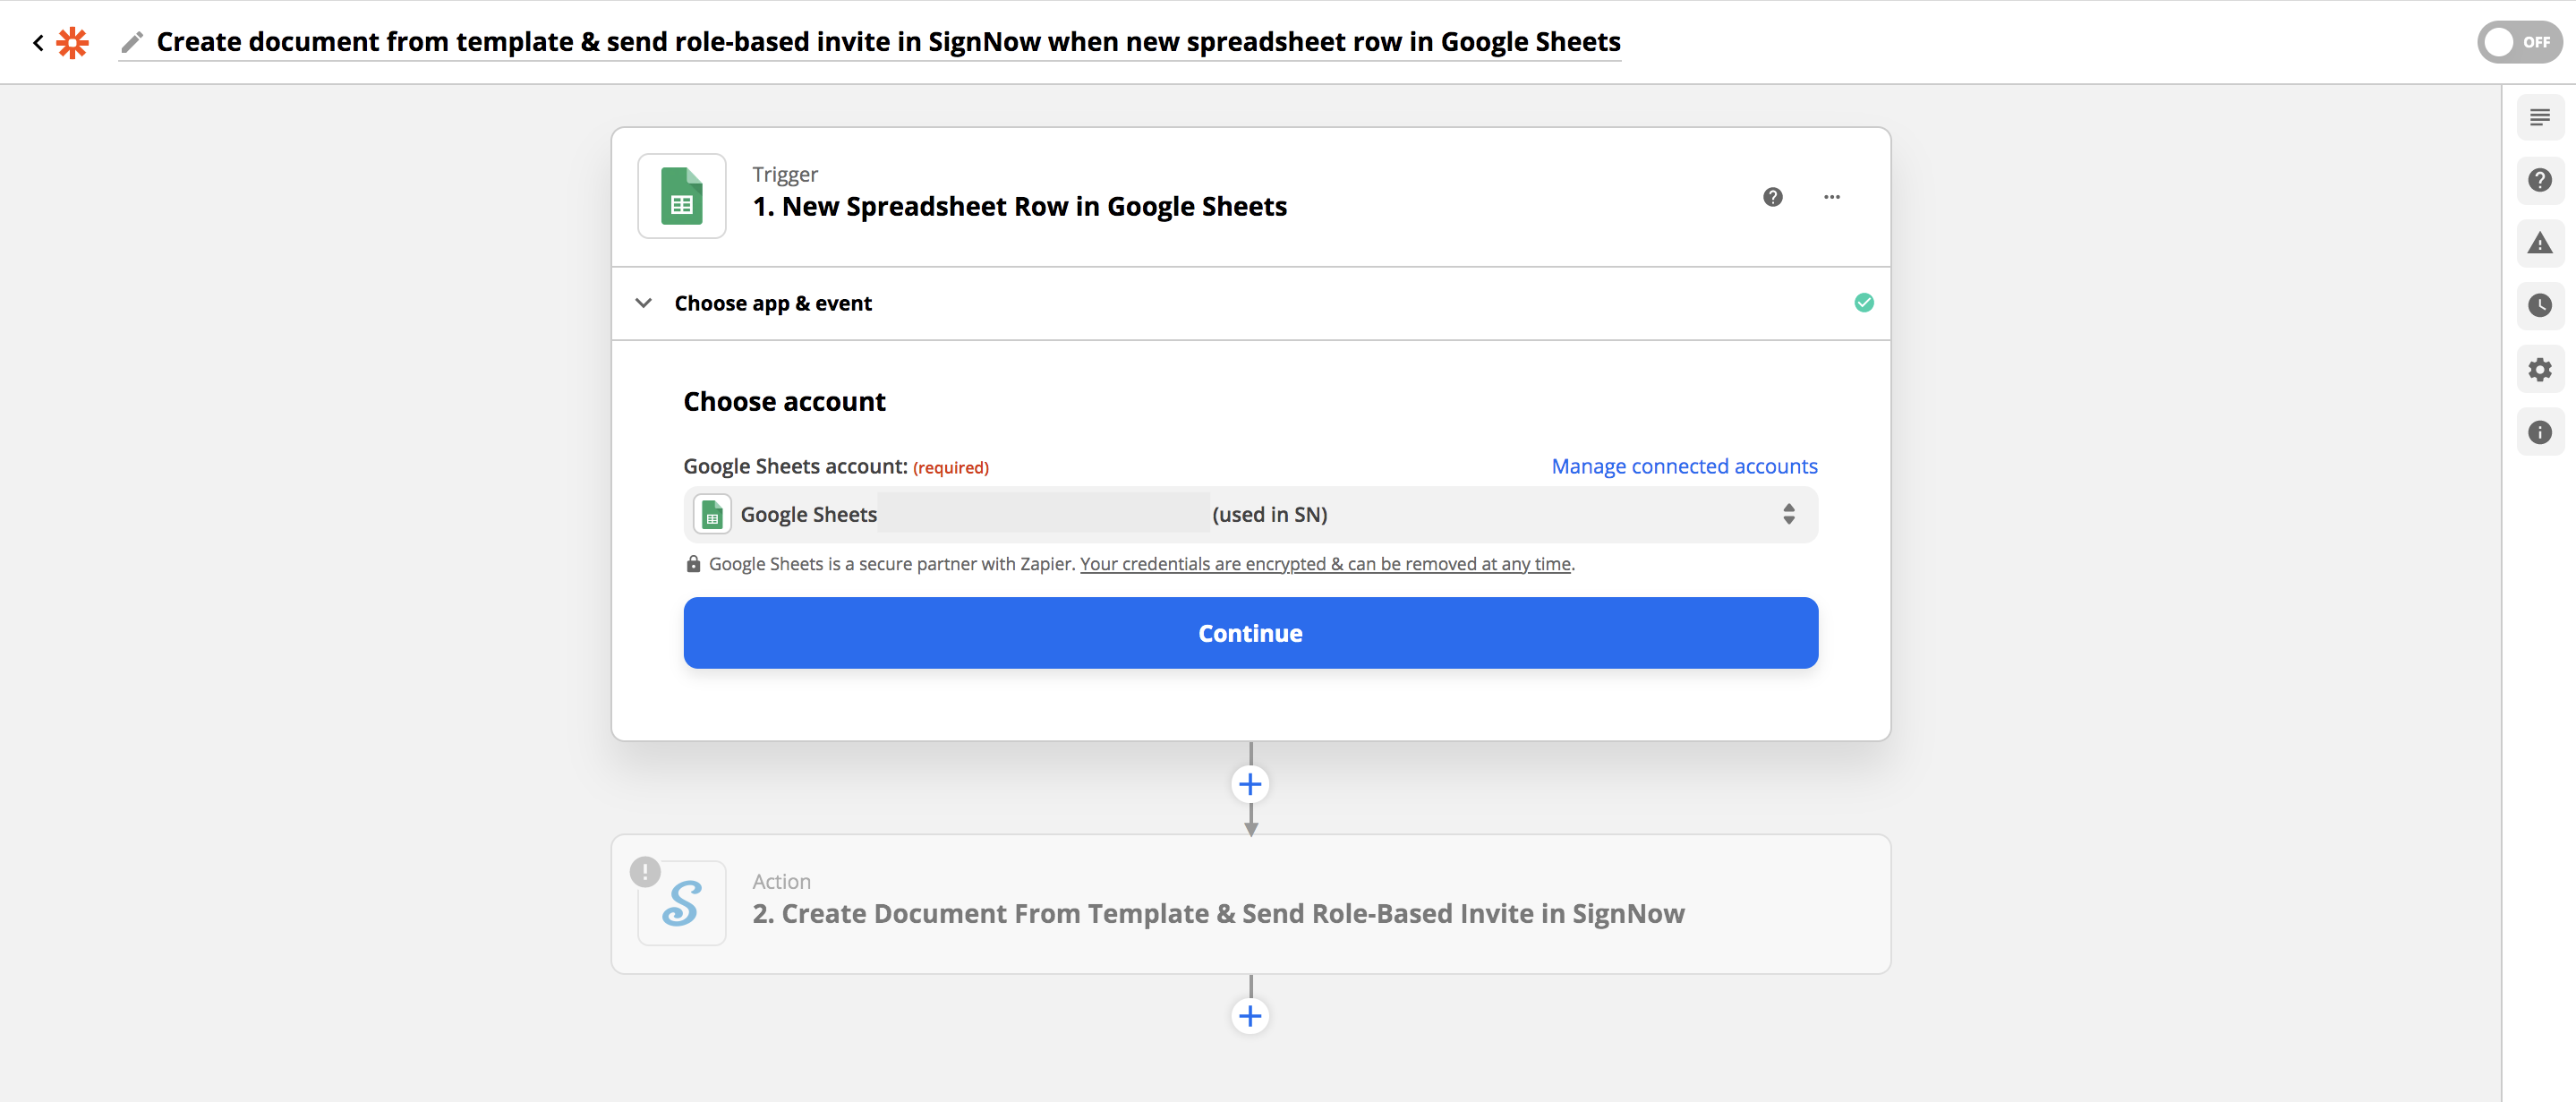 Step 2. In the Choose app & event, provide your Google Sheets account